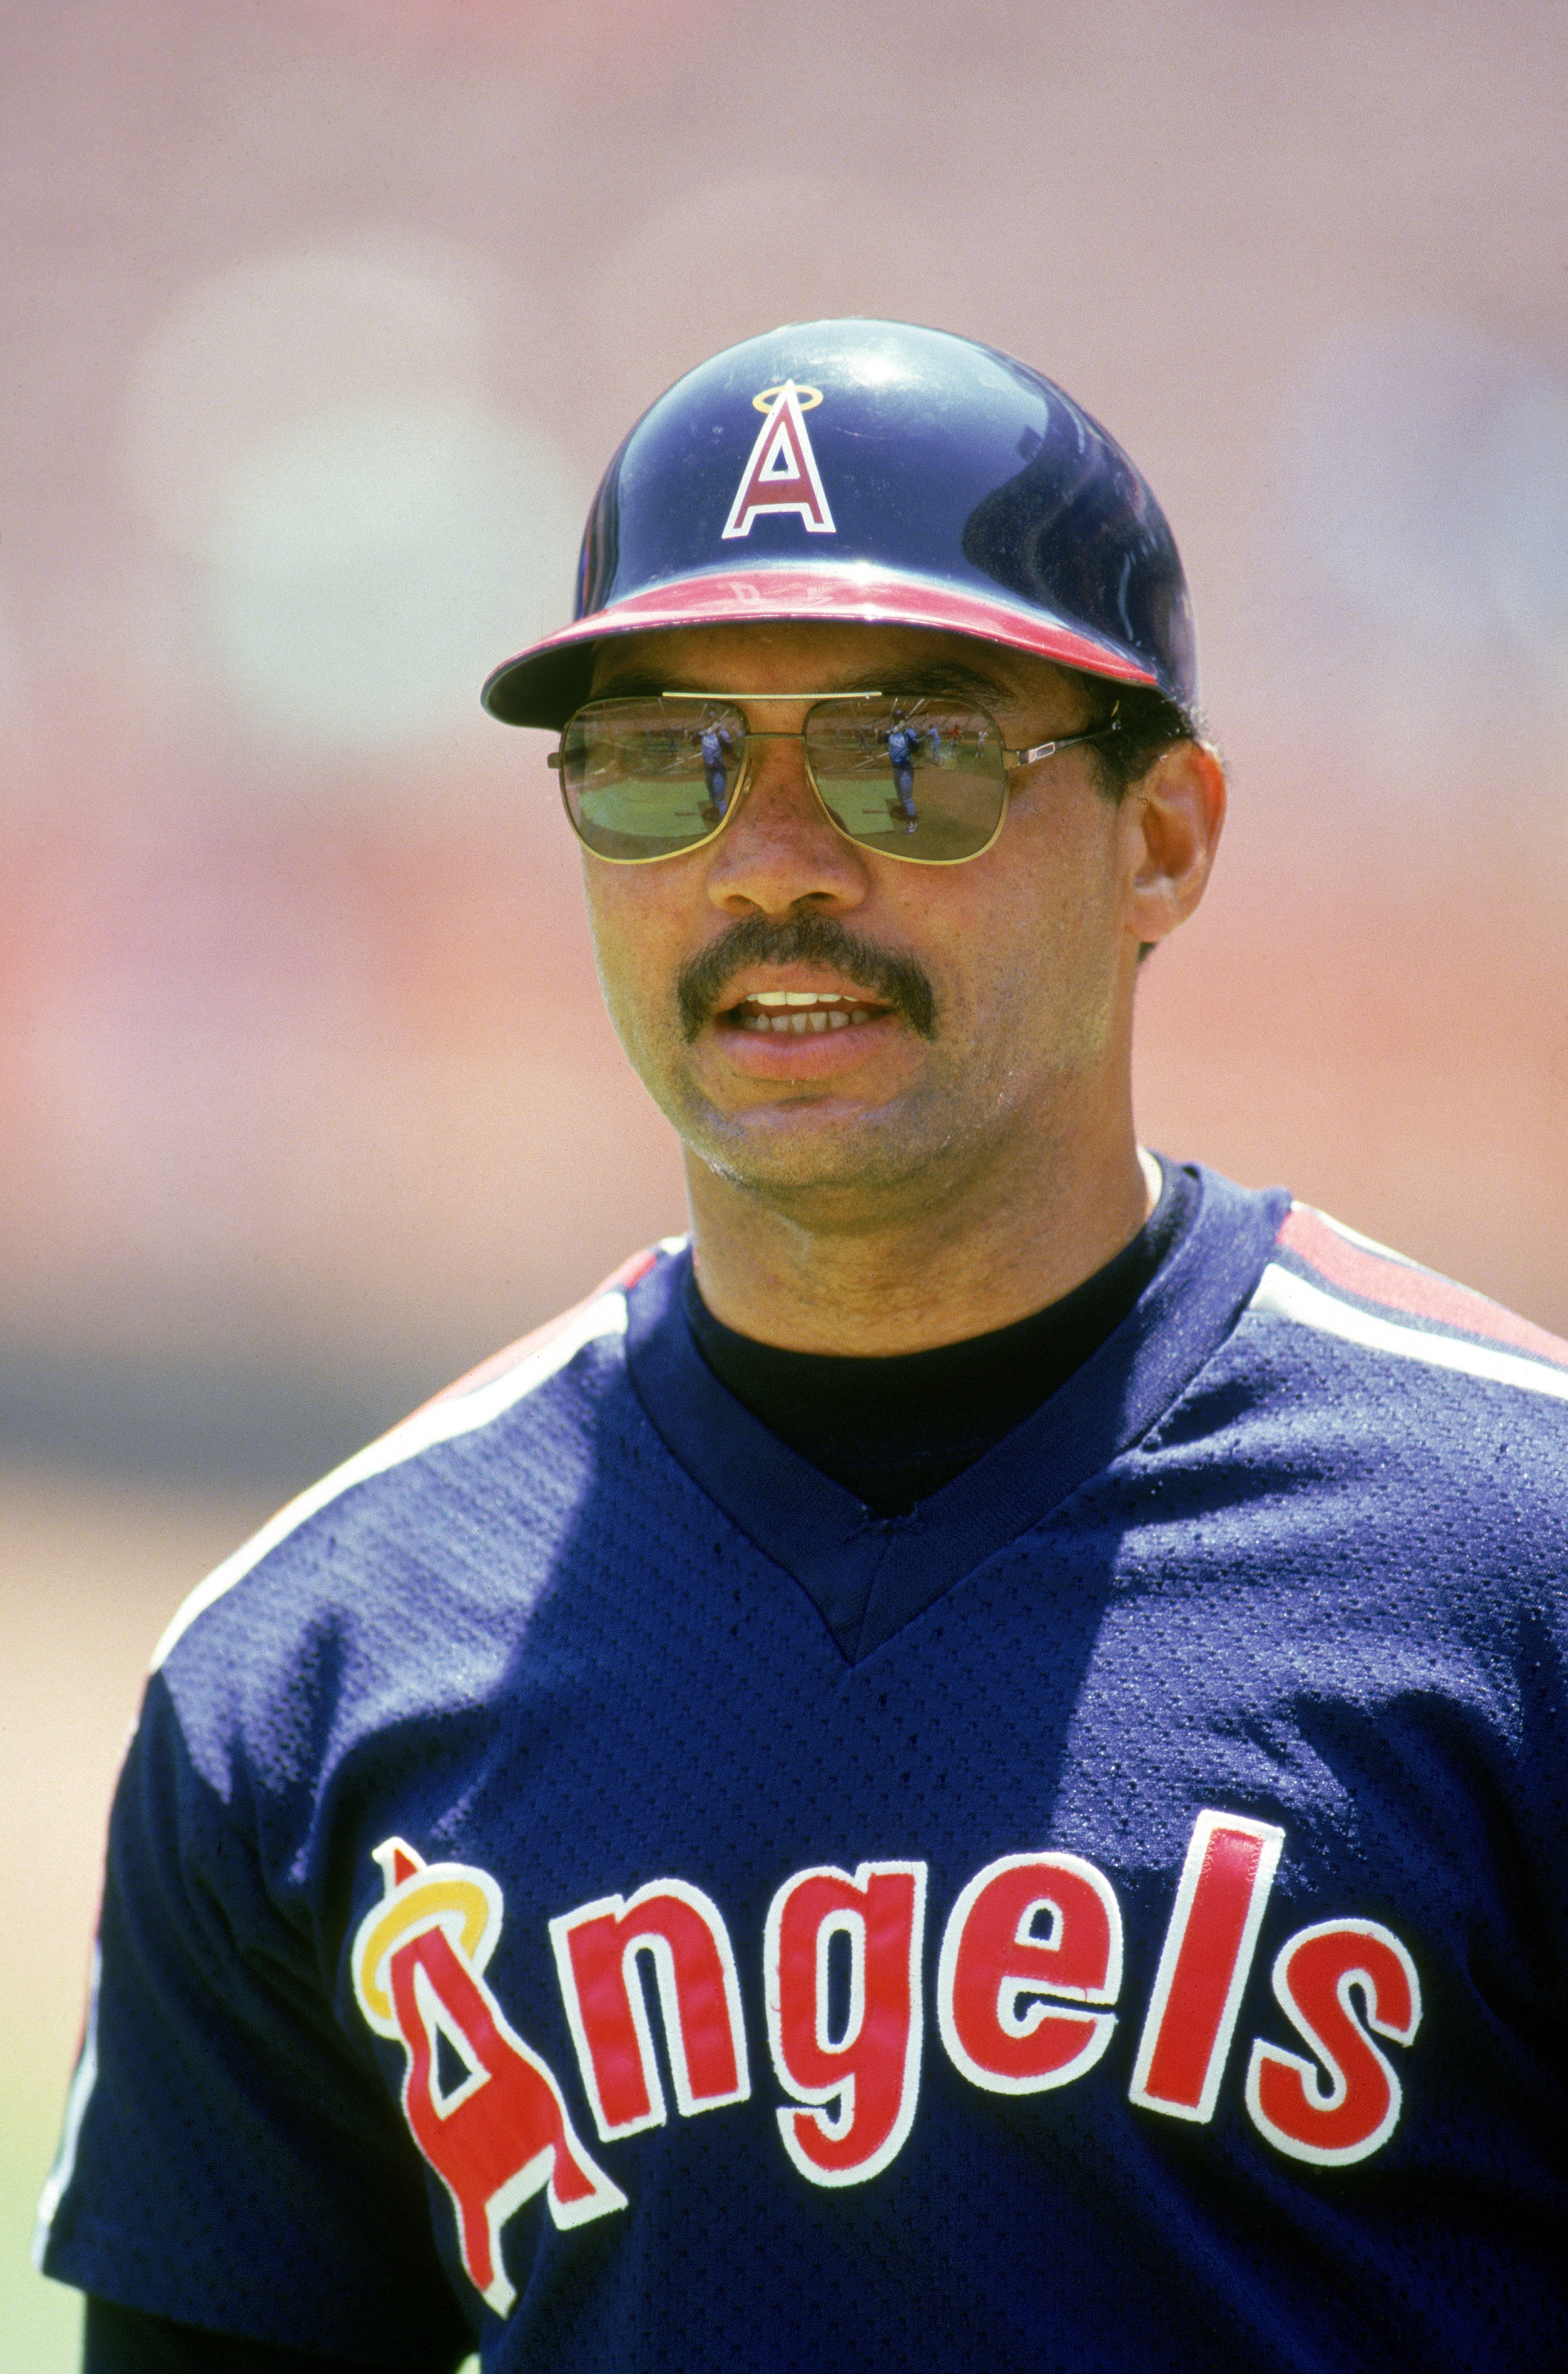 ANAHEIM, CA - 1986:  Reggie Jackson #44 of the California Angels stands on the field before a 1986 MLB game at Angel Stadium in Anaheim, California. (Photo by Rick Stewart/Getty Images)